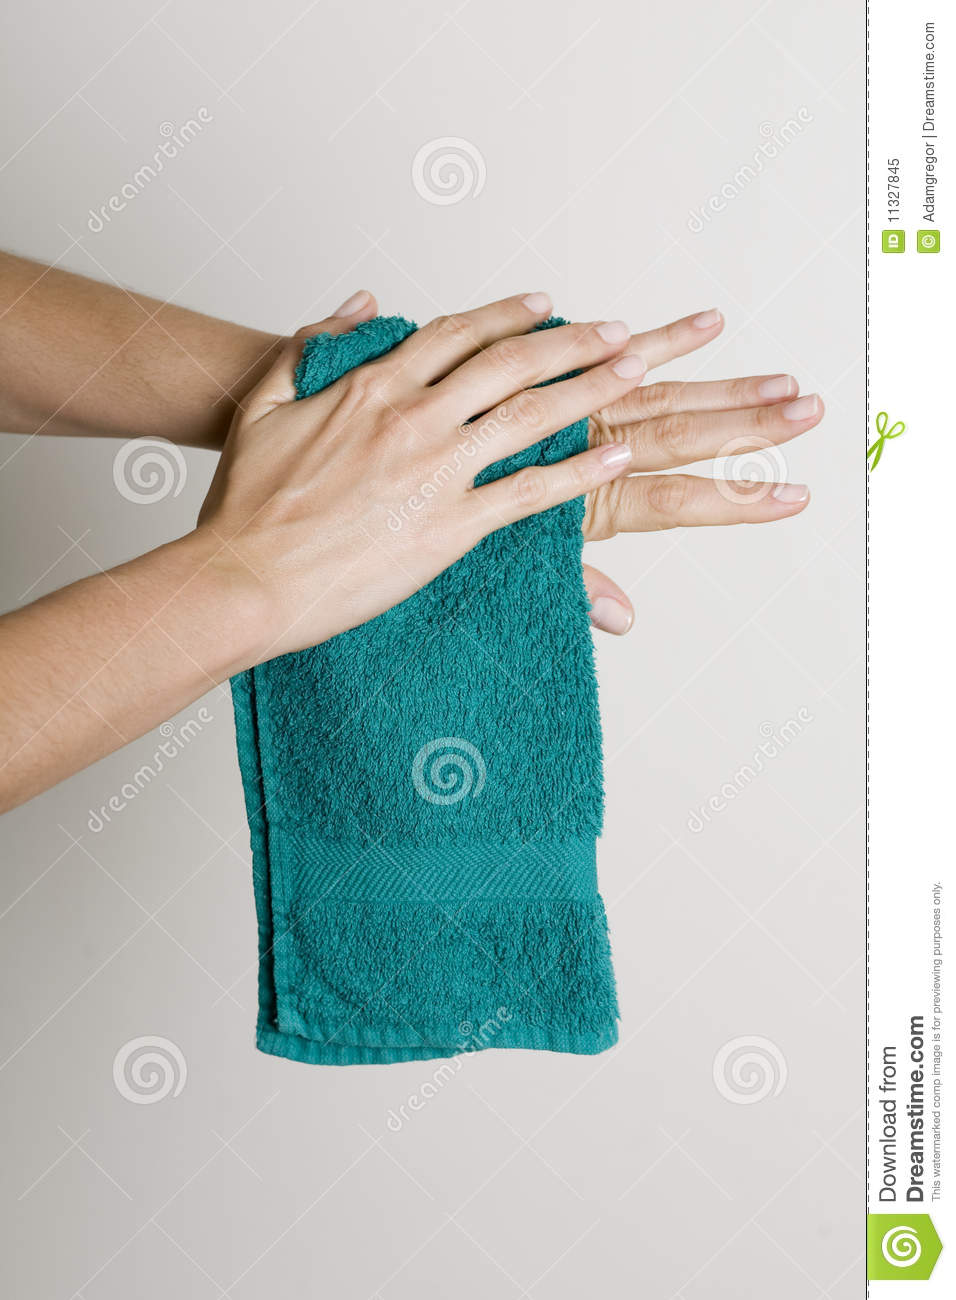 Drying Hands With A Towel Royalty Free Stock Photo   Image  11327845